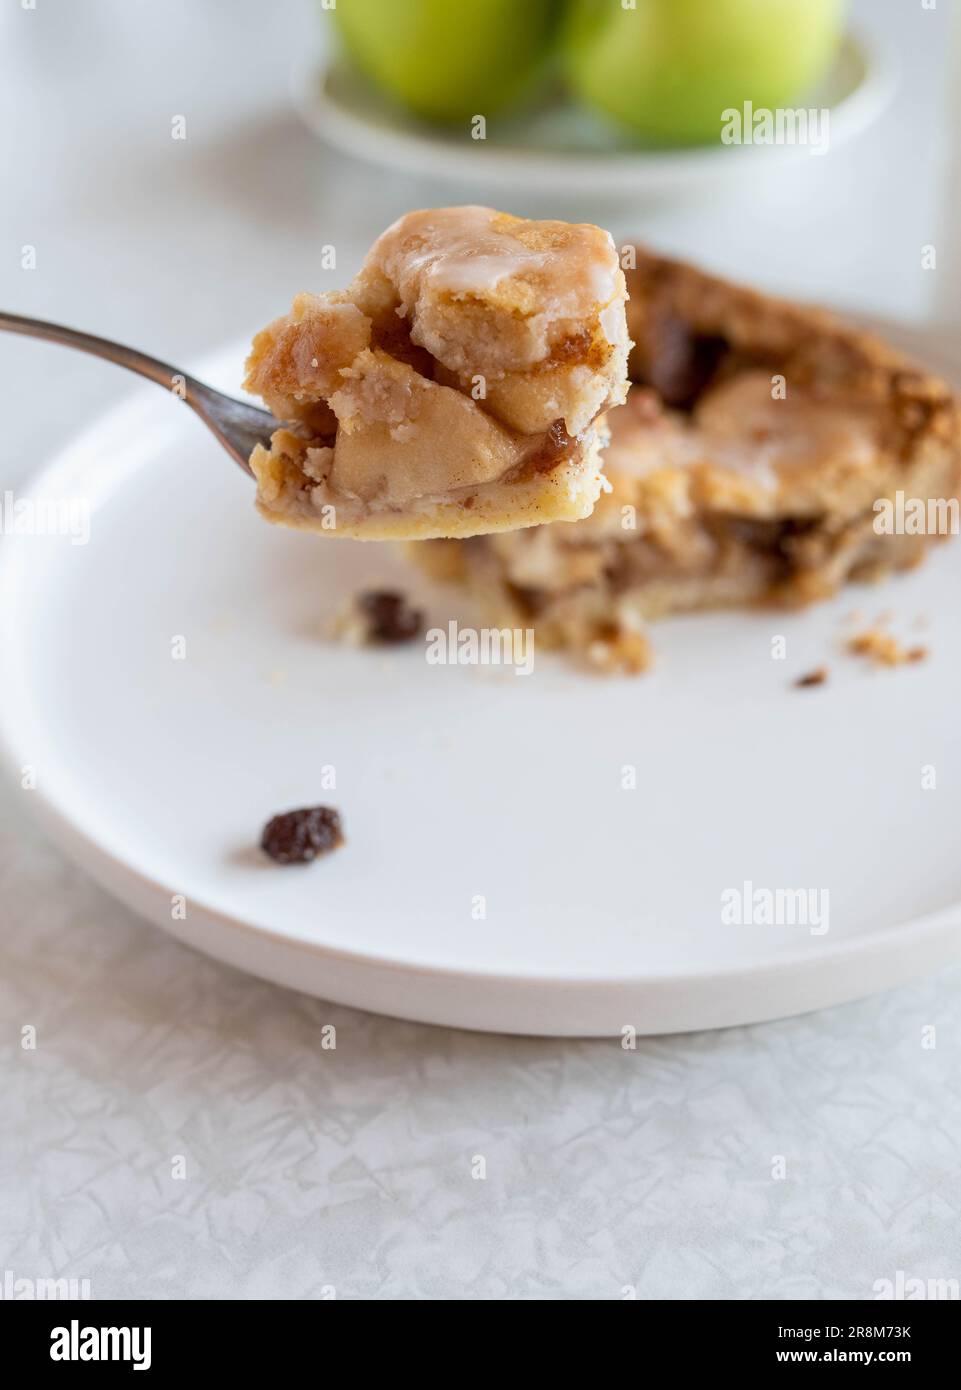 A bite of apple pie on a fork Stock Photo